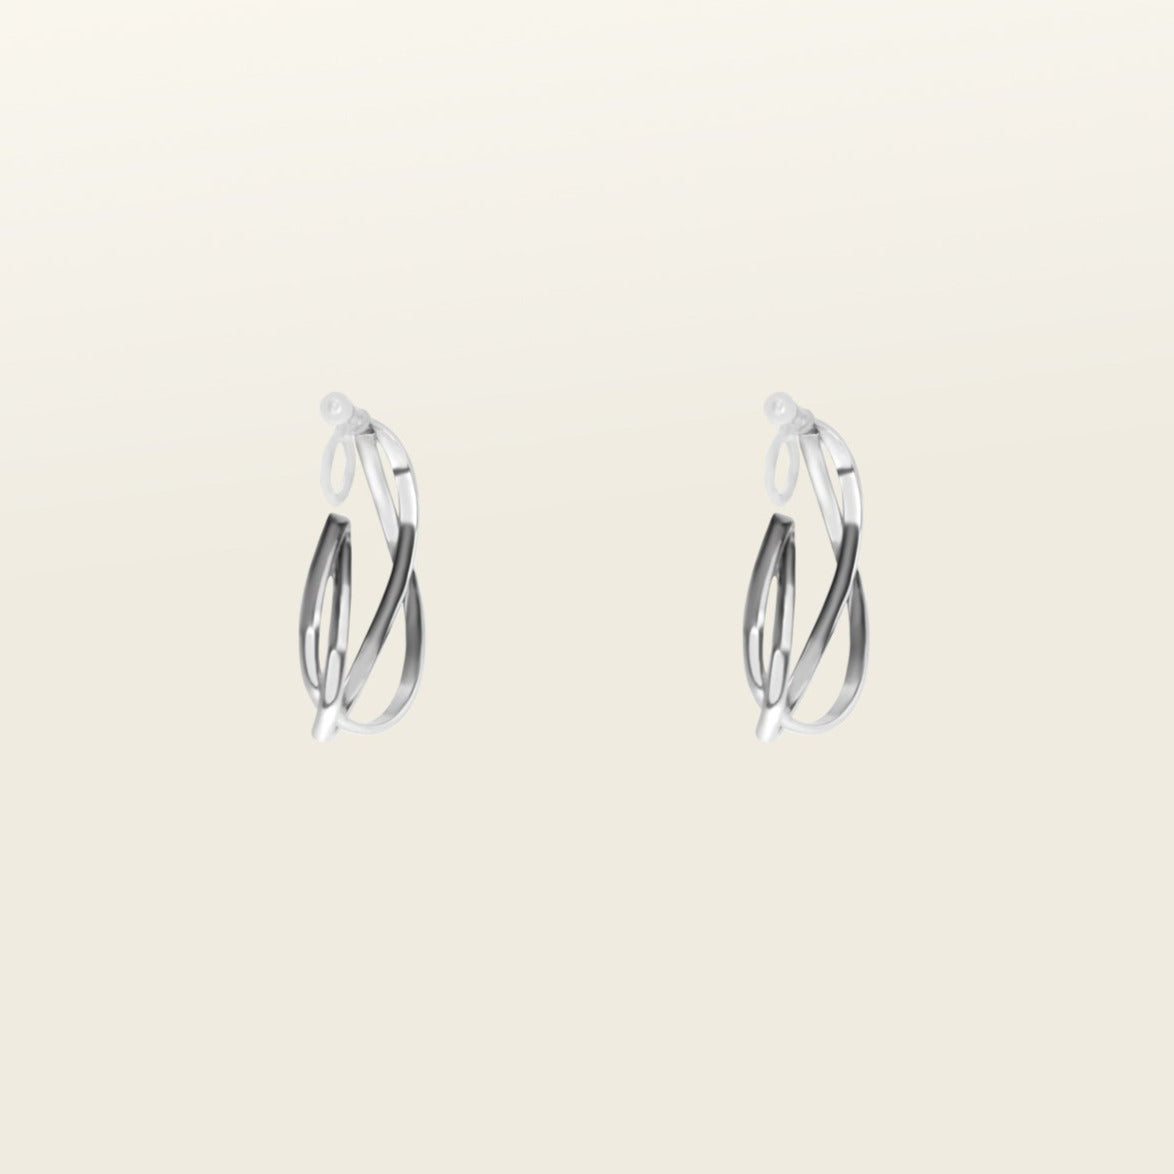 Image of the Silver Vienna Hoop Clip-On Earrings are crafted of Silver Tone Metal Alloy and feature a resin clip-on closure. These earrings are suited for all ear types, providing a medium-secure hold and an 8-12 hour average comfortable wear duration. Adjustment is not possible for this item; it is sold as a single pair in gold and silver.